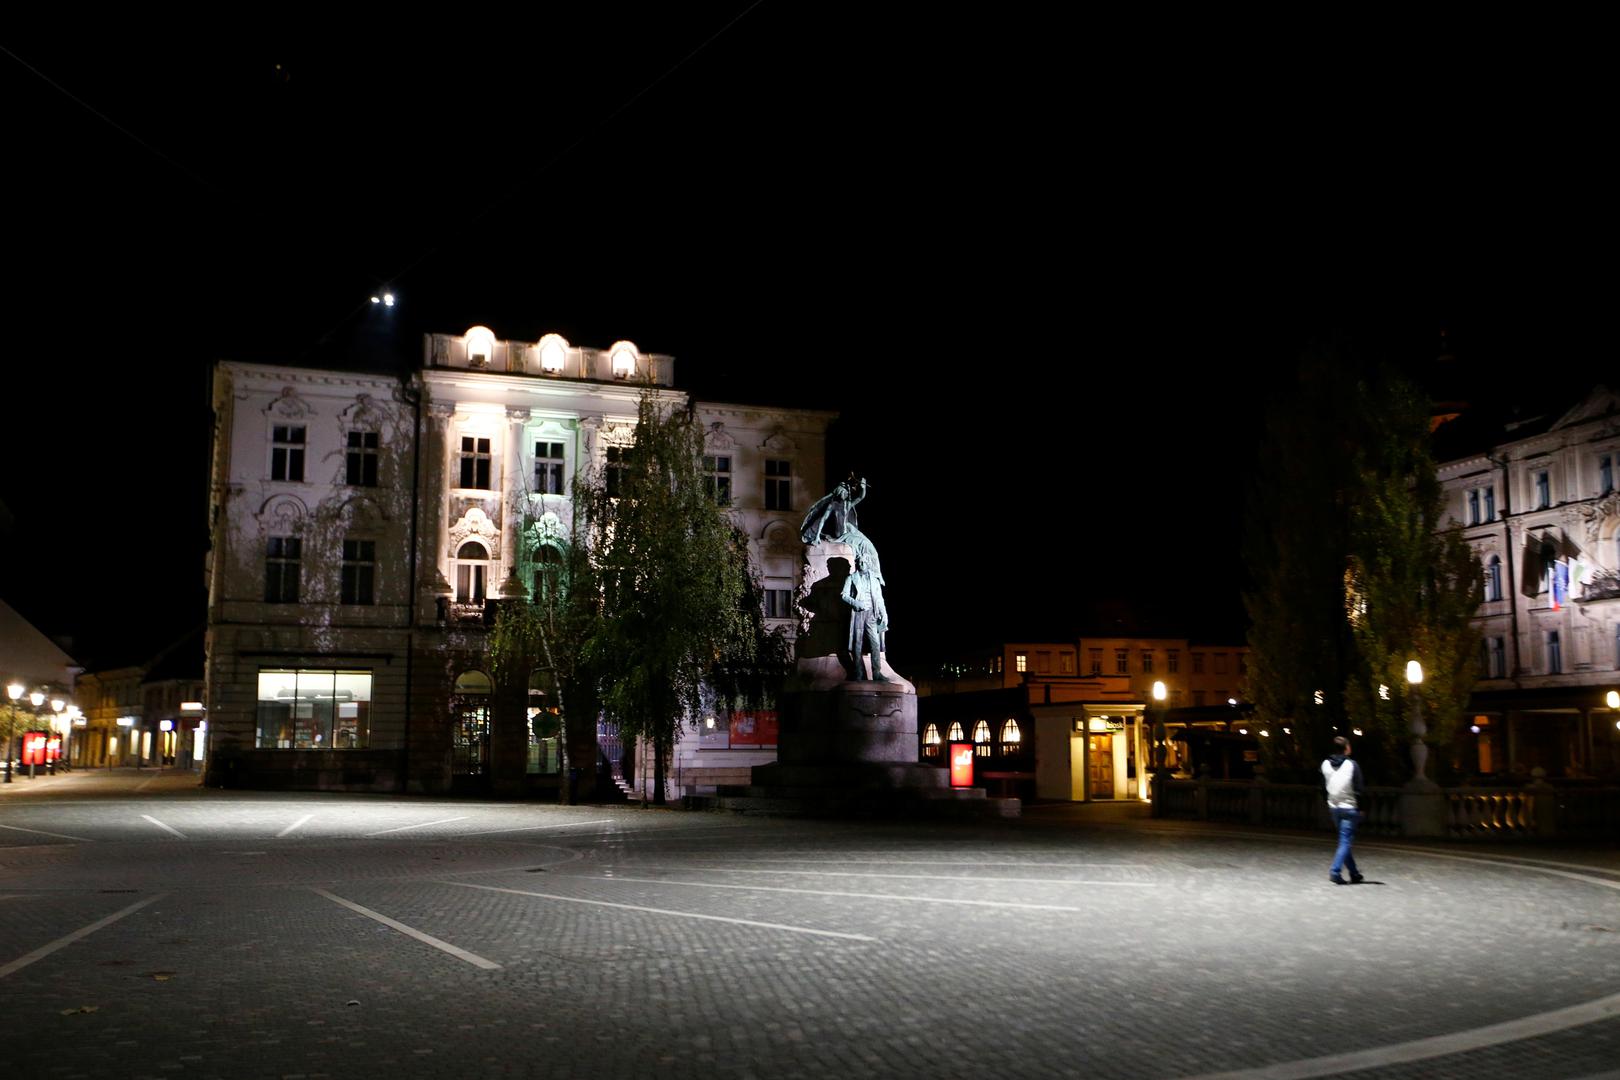 Slovenia starts a nightly curfew from 9 p.m. to 6 a.m as to curb the rising of the coronavirus disease (COVID-19) cases in the country, in Ljubljana A person walks in an almost empty area of the city as Slovenia starts a nightly curfew from 9 p.m. to 6 a.m as part of a state of emergency called to curb the rising of the coronavirus disease (COVID-19) cases in the country, in Ljubljana, Slovenia, October 20, 2020. REUTERS/Borut Zivulovic BORUT ZIVULOVIC